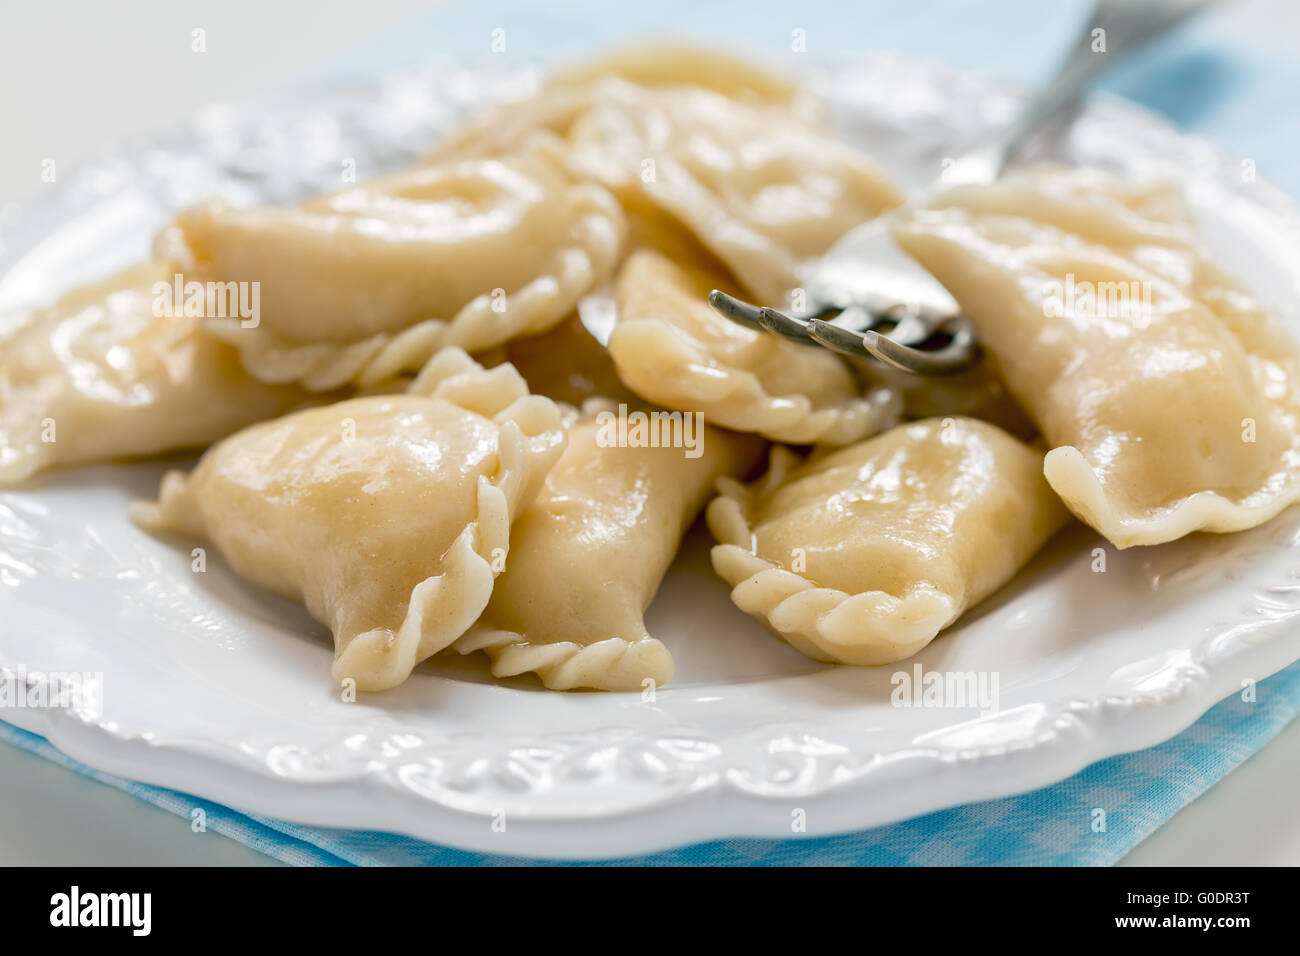 Dumplings with cottage cheese and fork on the plate. Stock Photo